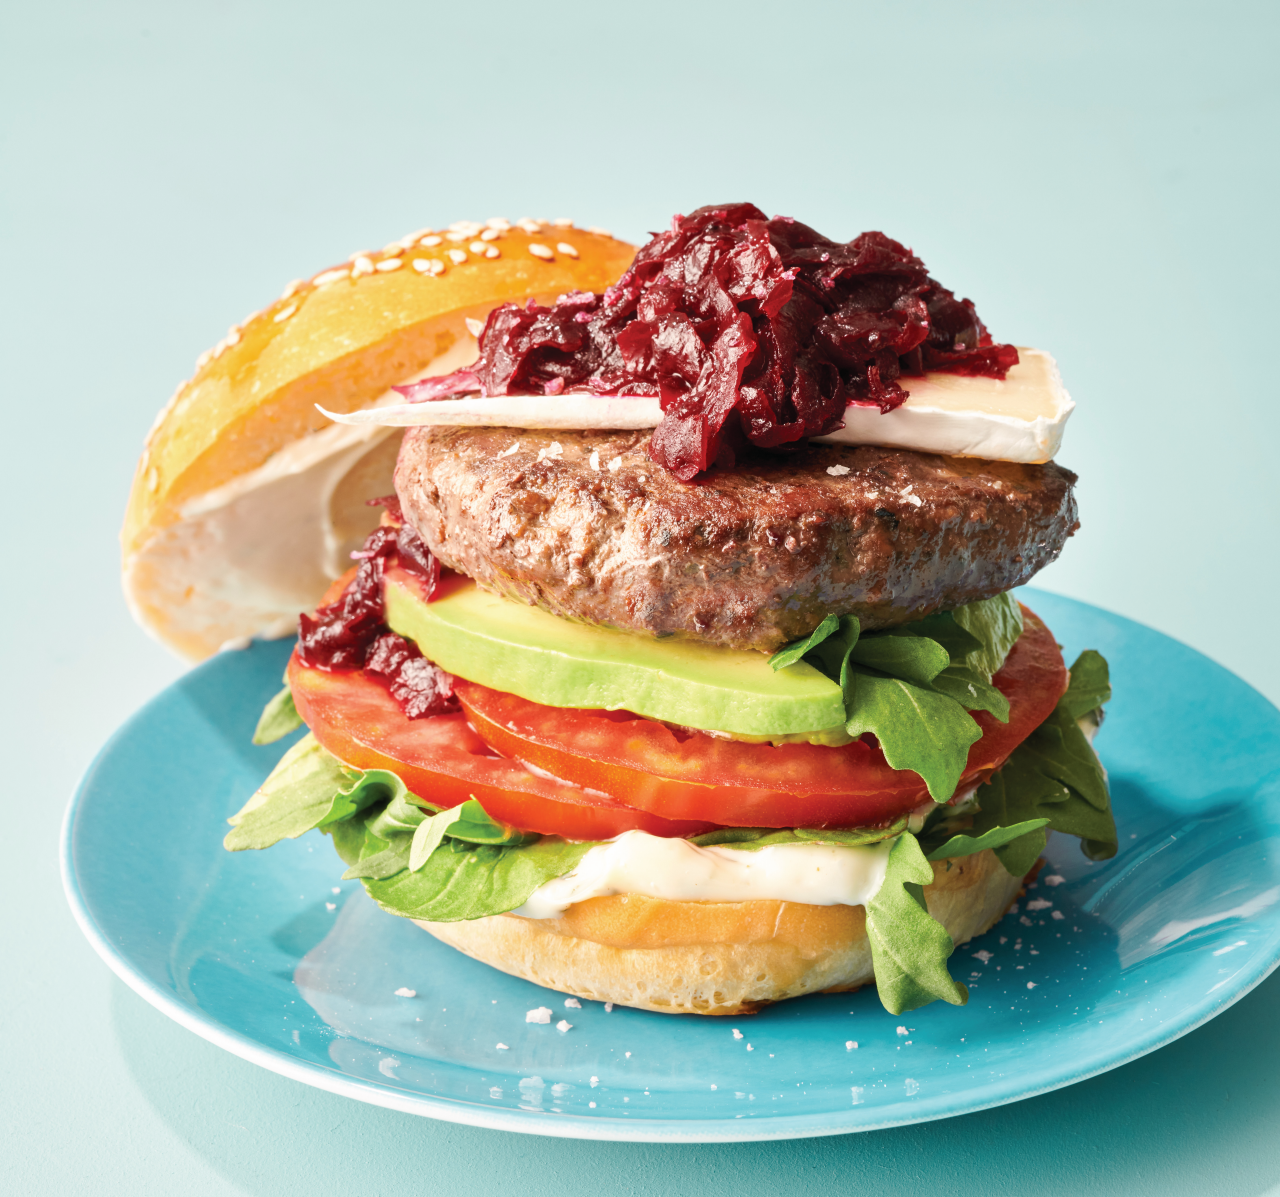 Beef and Horopito Pepper Burger with Beetroot Relish on a blue plate